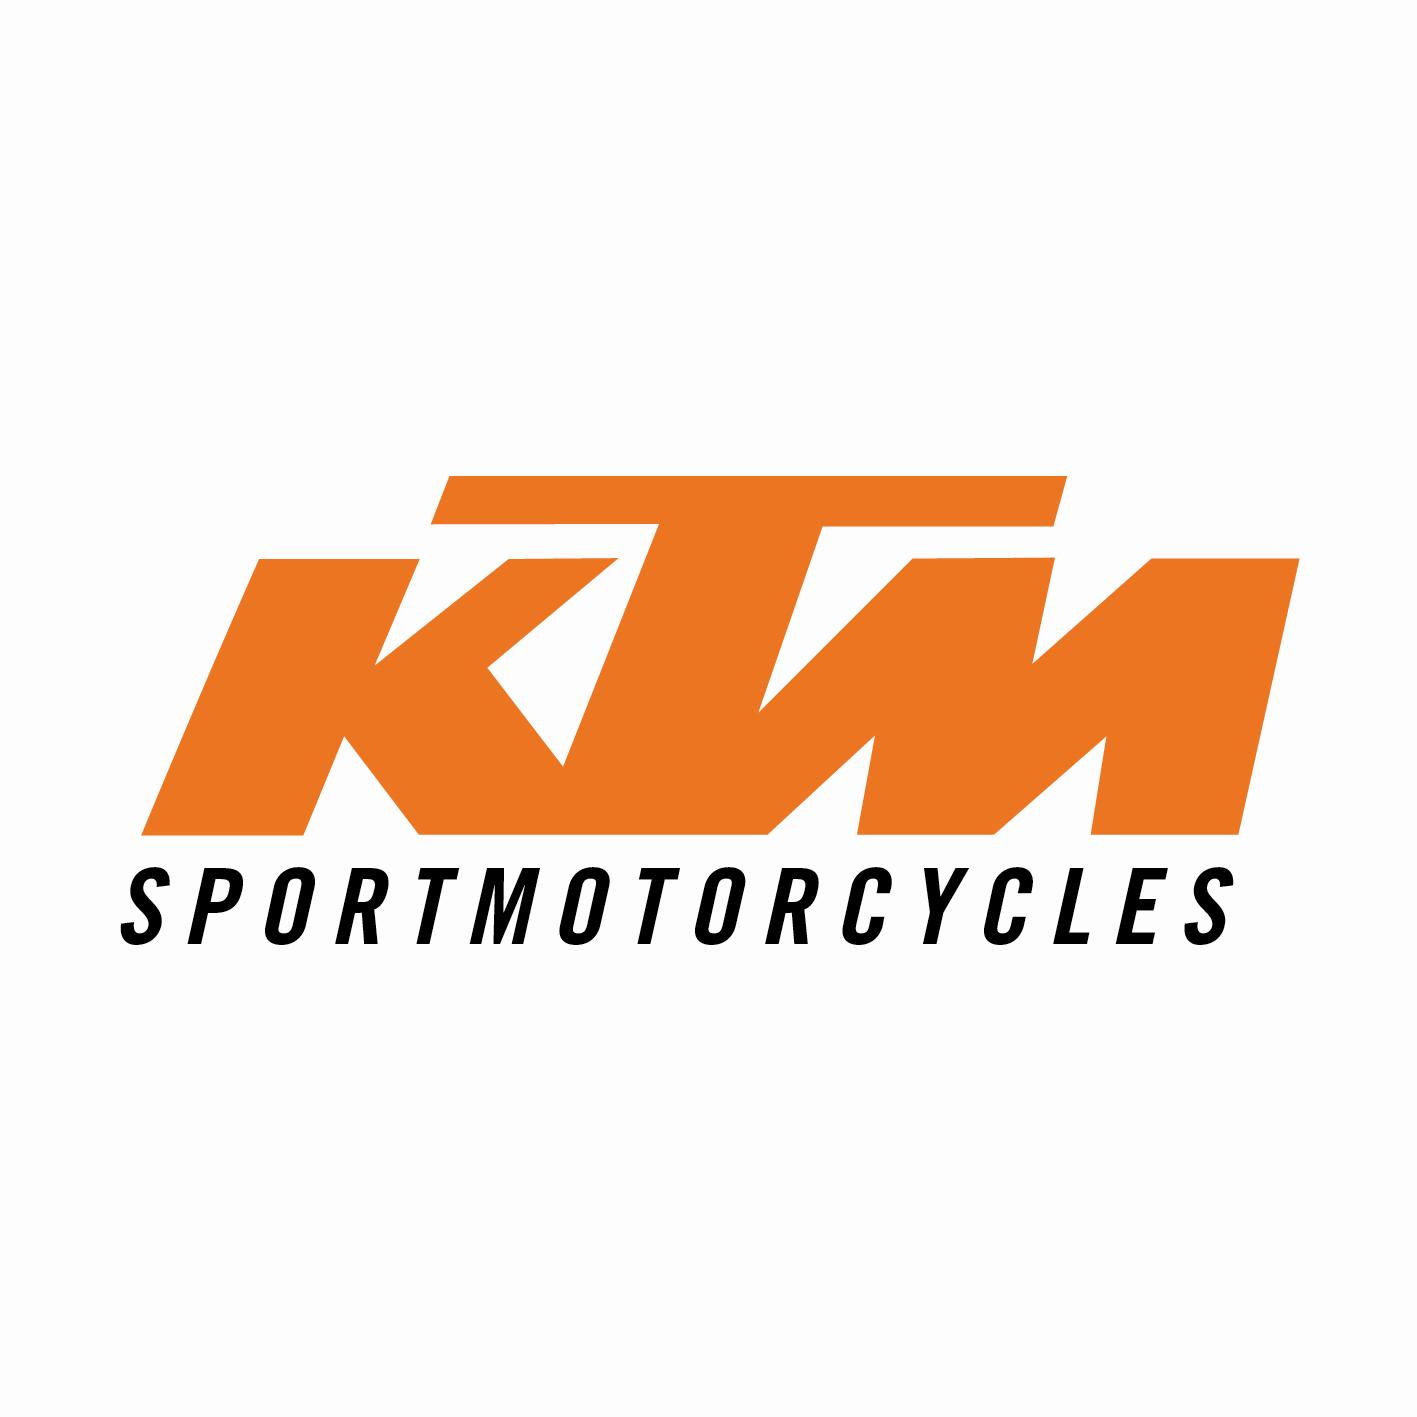 KTM ref2 sportmotorcycles STICKERS MOTO CASQUE SCOOTER STICKER AUTOCOLLANT ADHESIFS